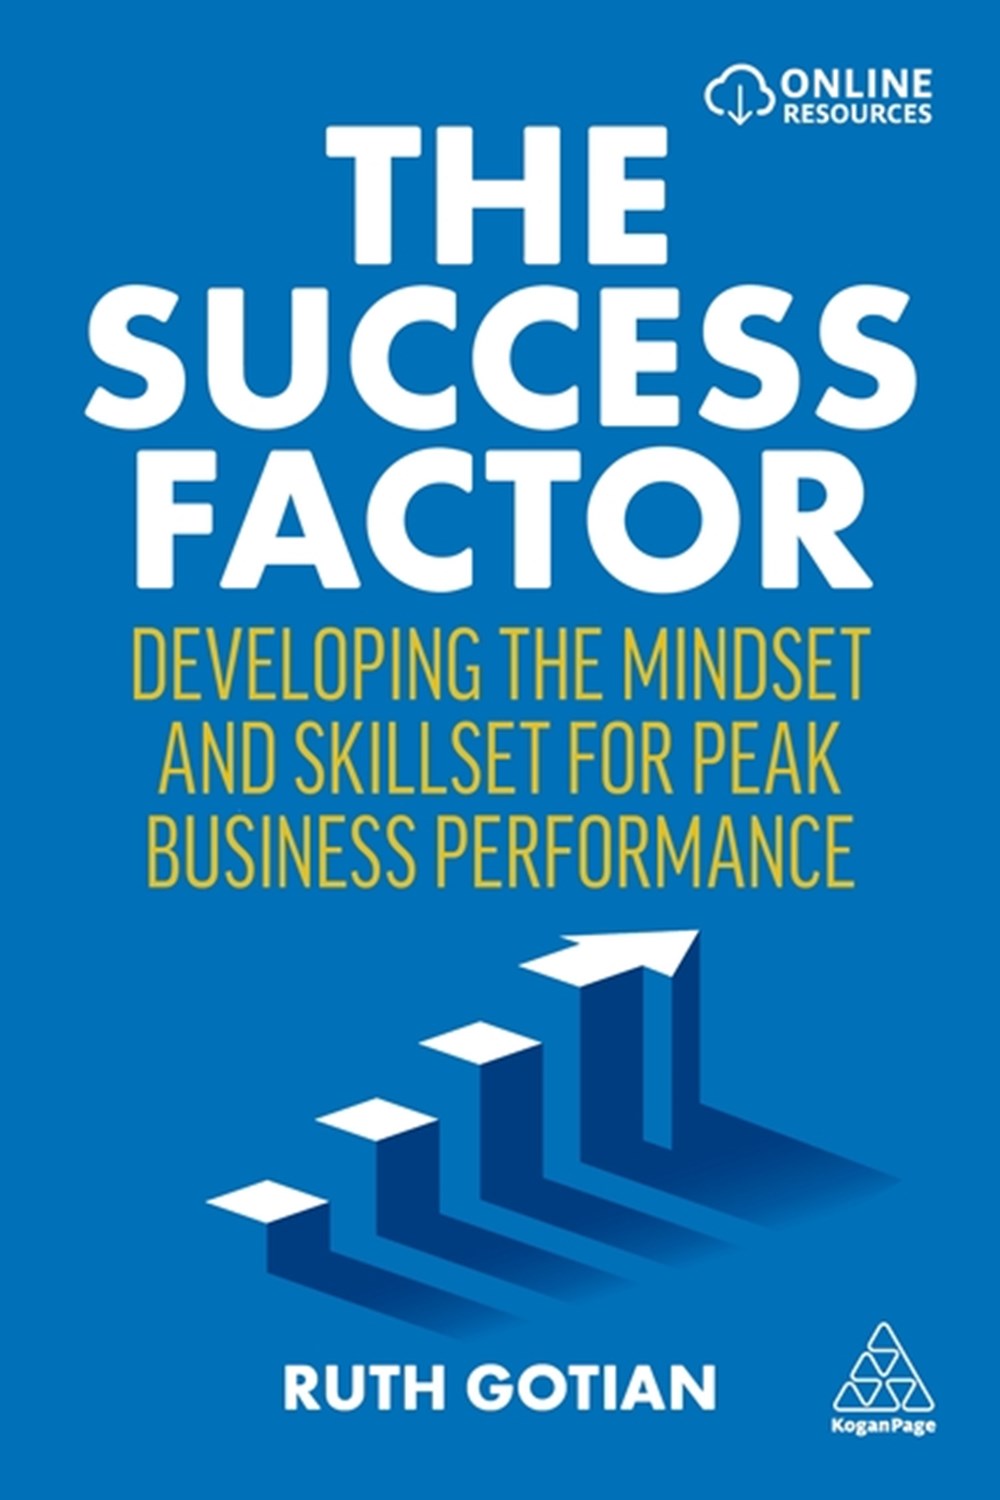 Success Factor Developing the Mindset and Skillset for Peak Business Performance